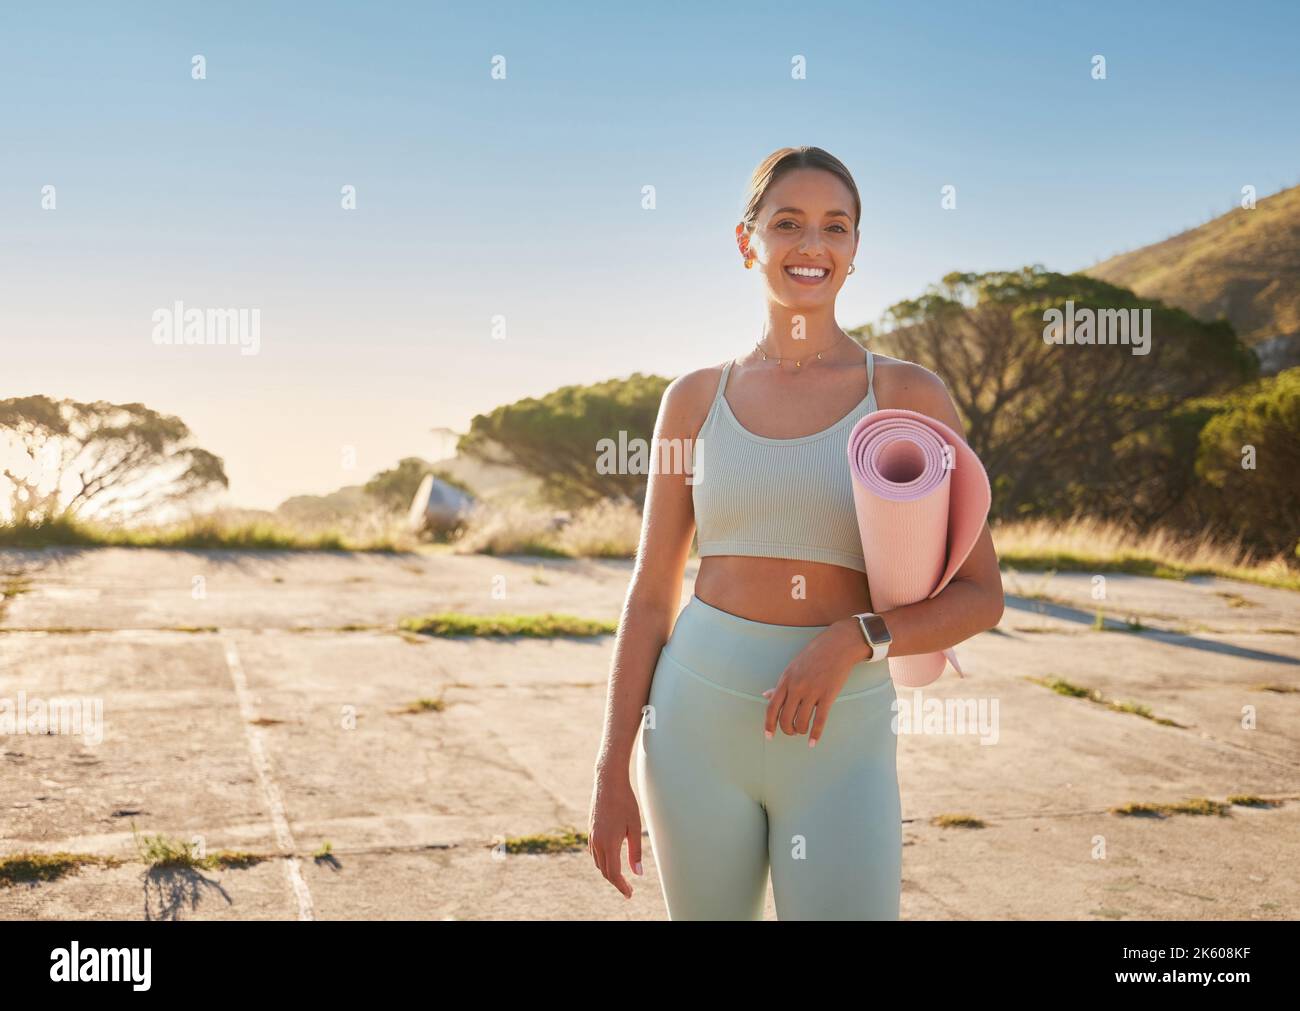 Toned woman smiling after fitness workout Stock Photo - Alamy